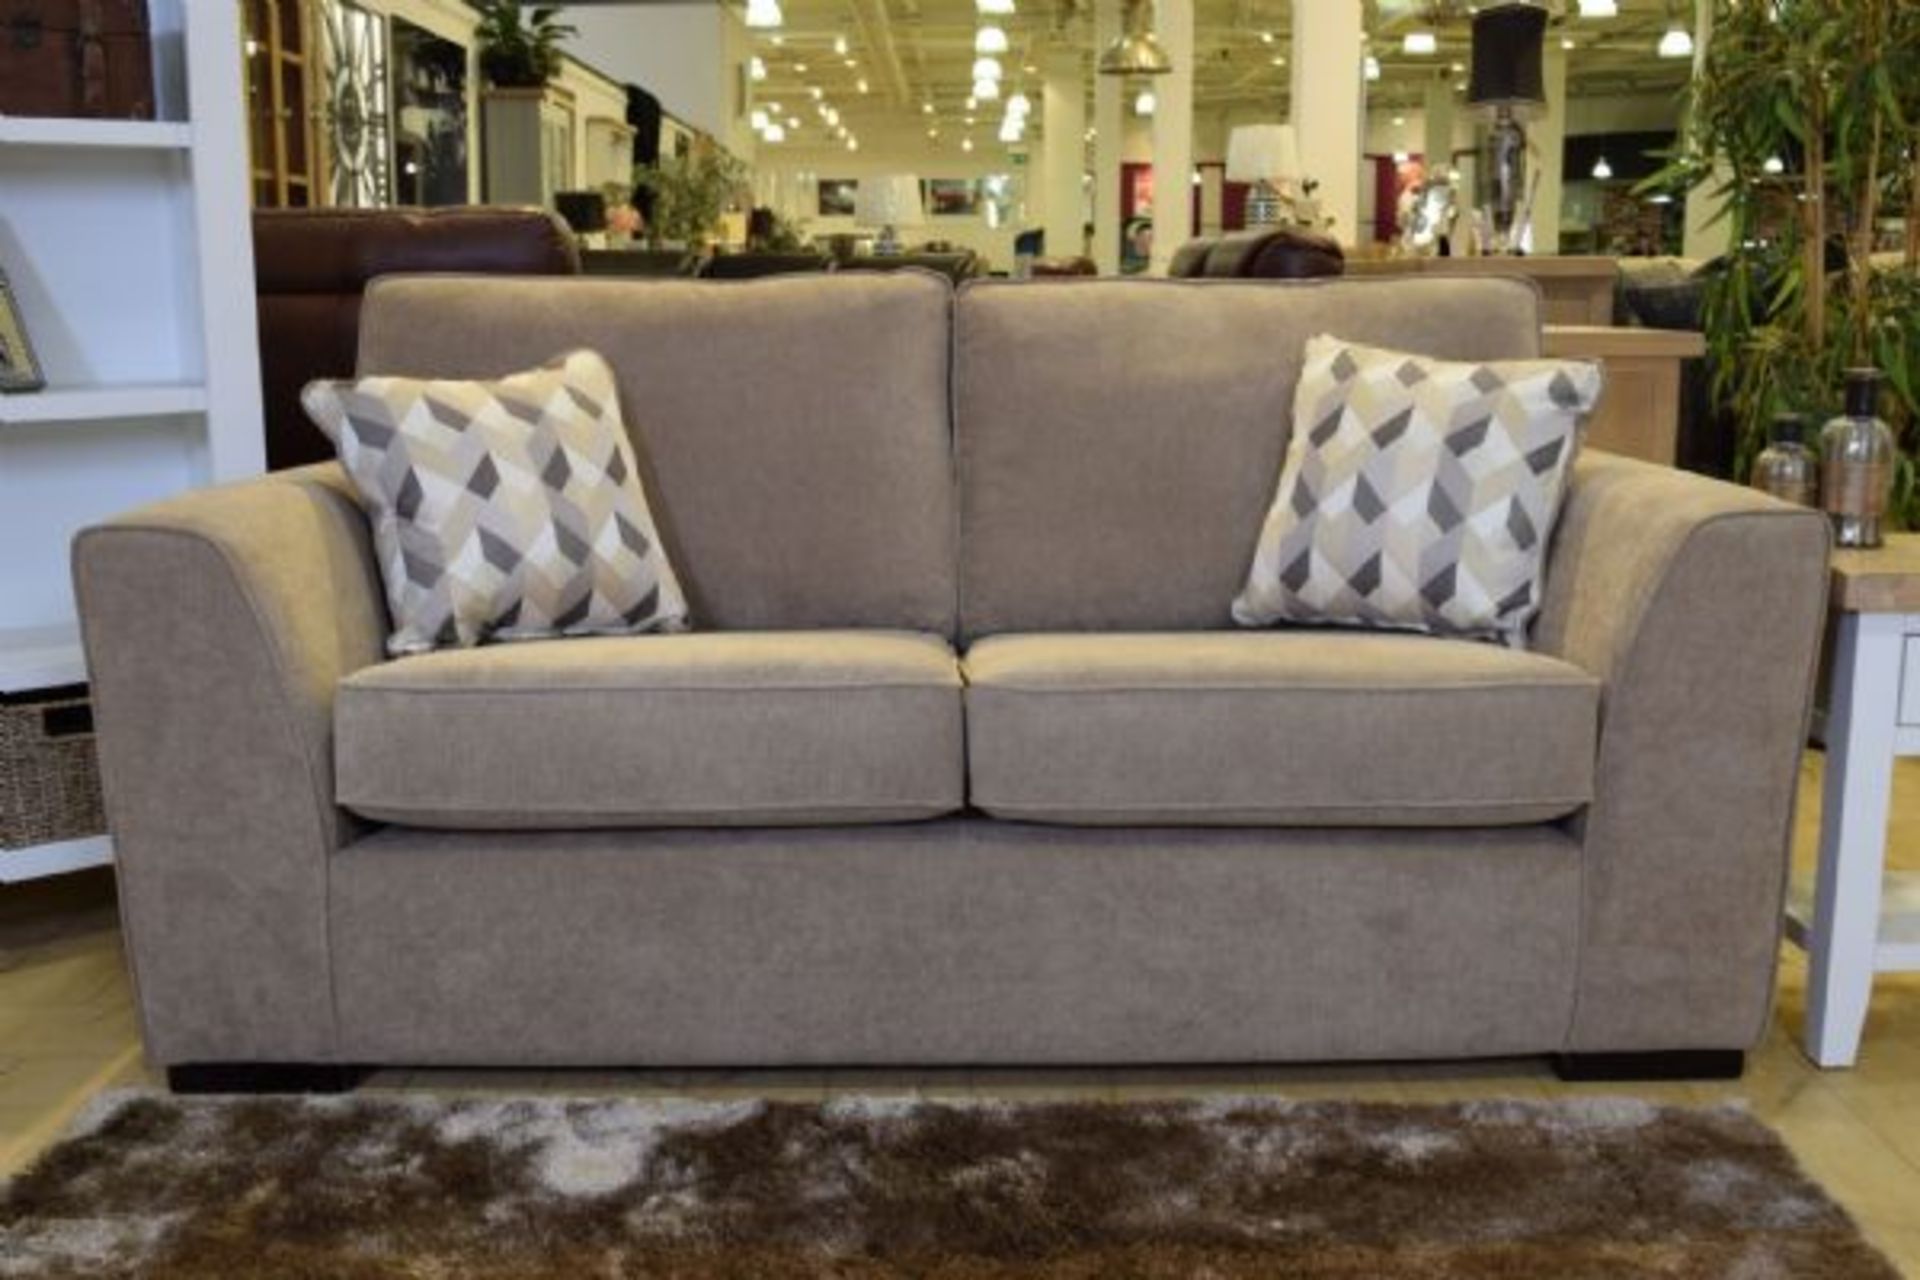 1 BRAND NEW BAGGED BOSTON LARGE 3 SEATER SOFA IN TAUPE / CTS07907 (VIEWING HIGHLY RECOMMENDED)